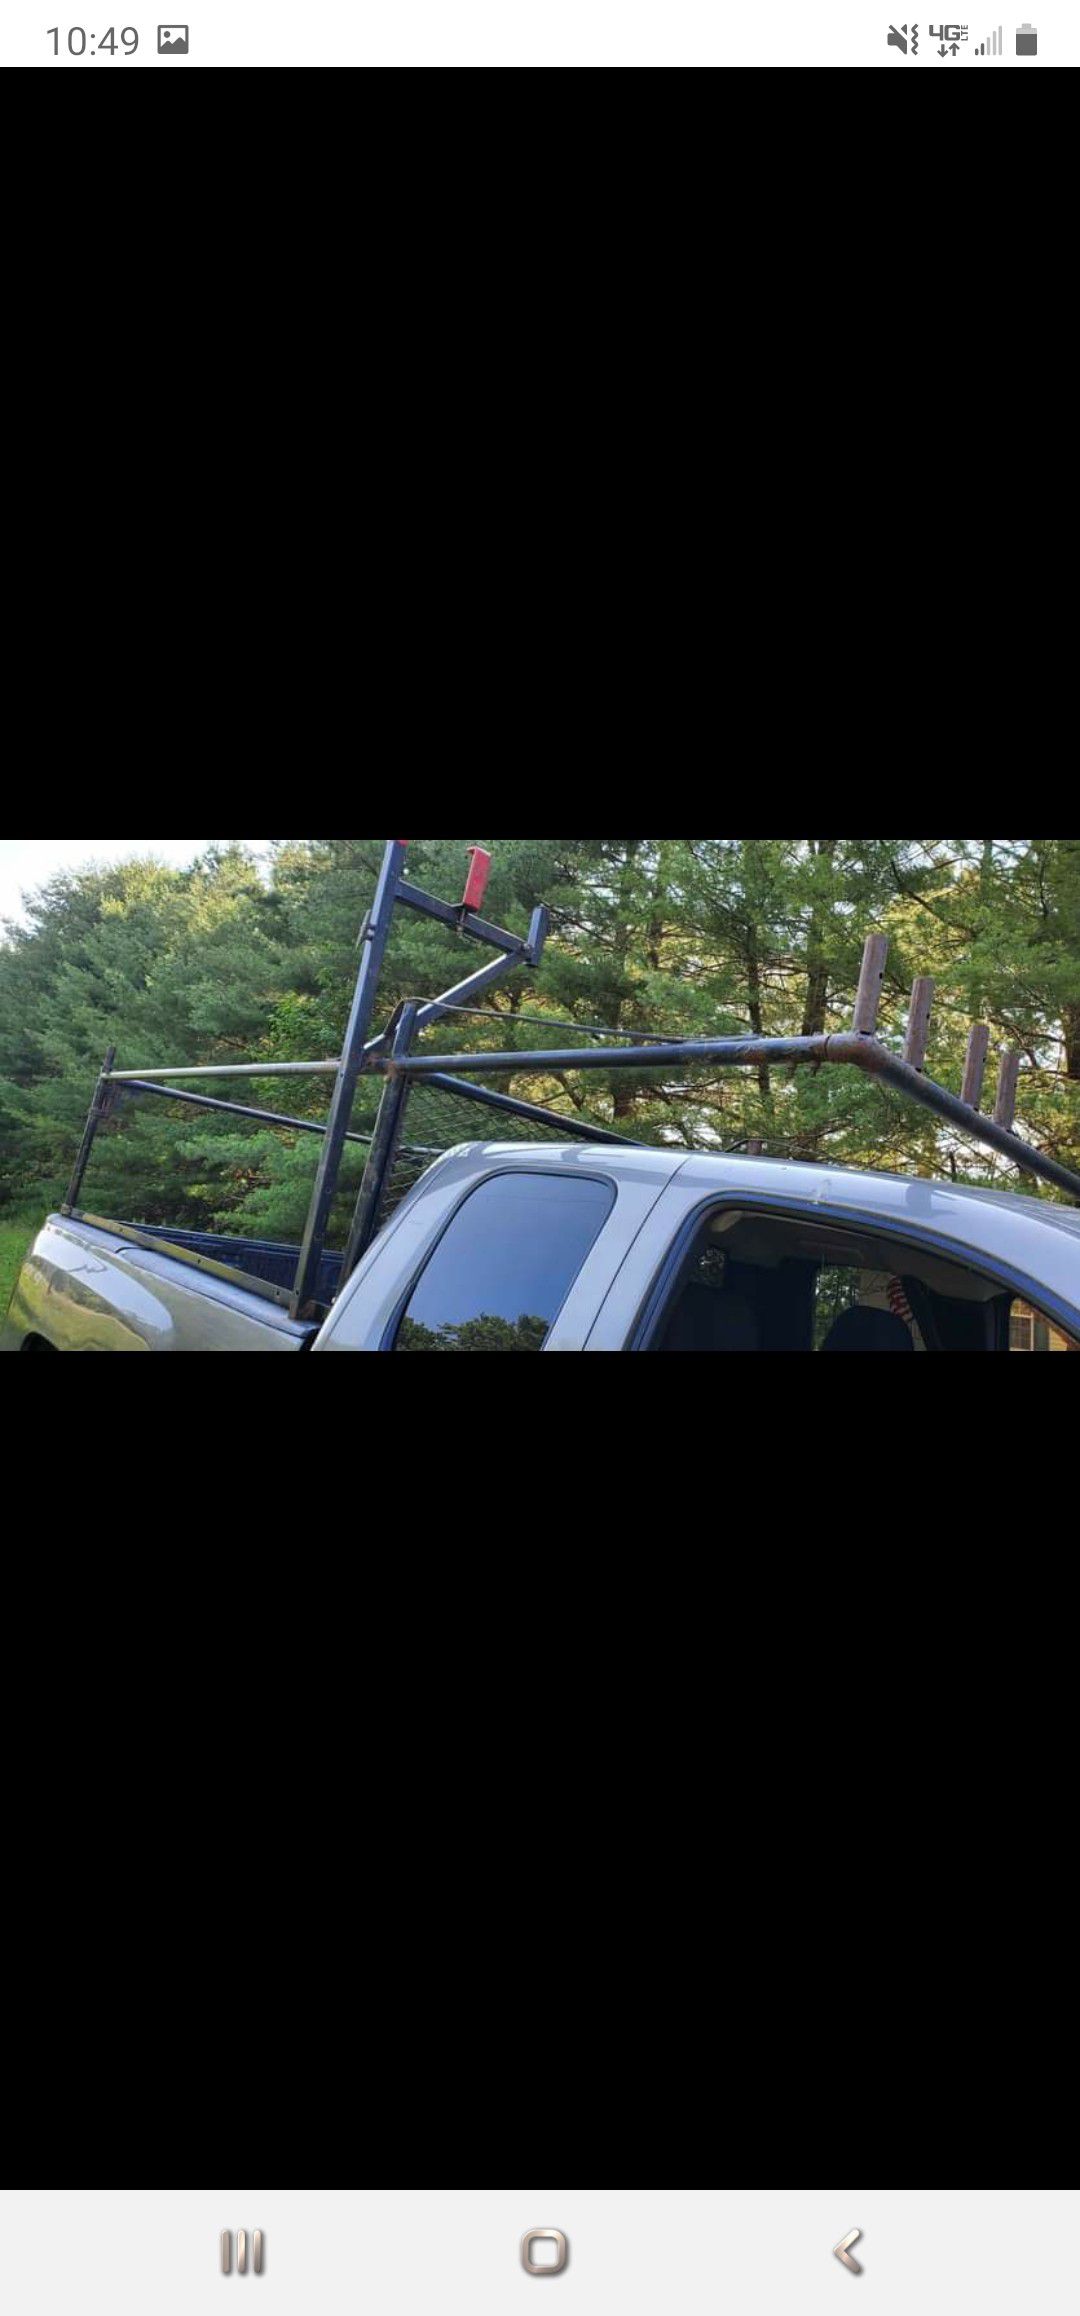 Ladder rack and side box for 8ft bed